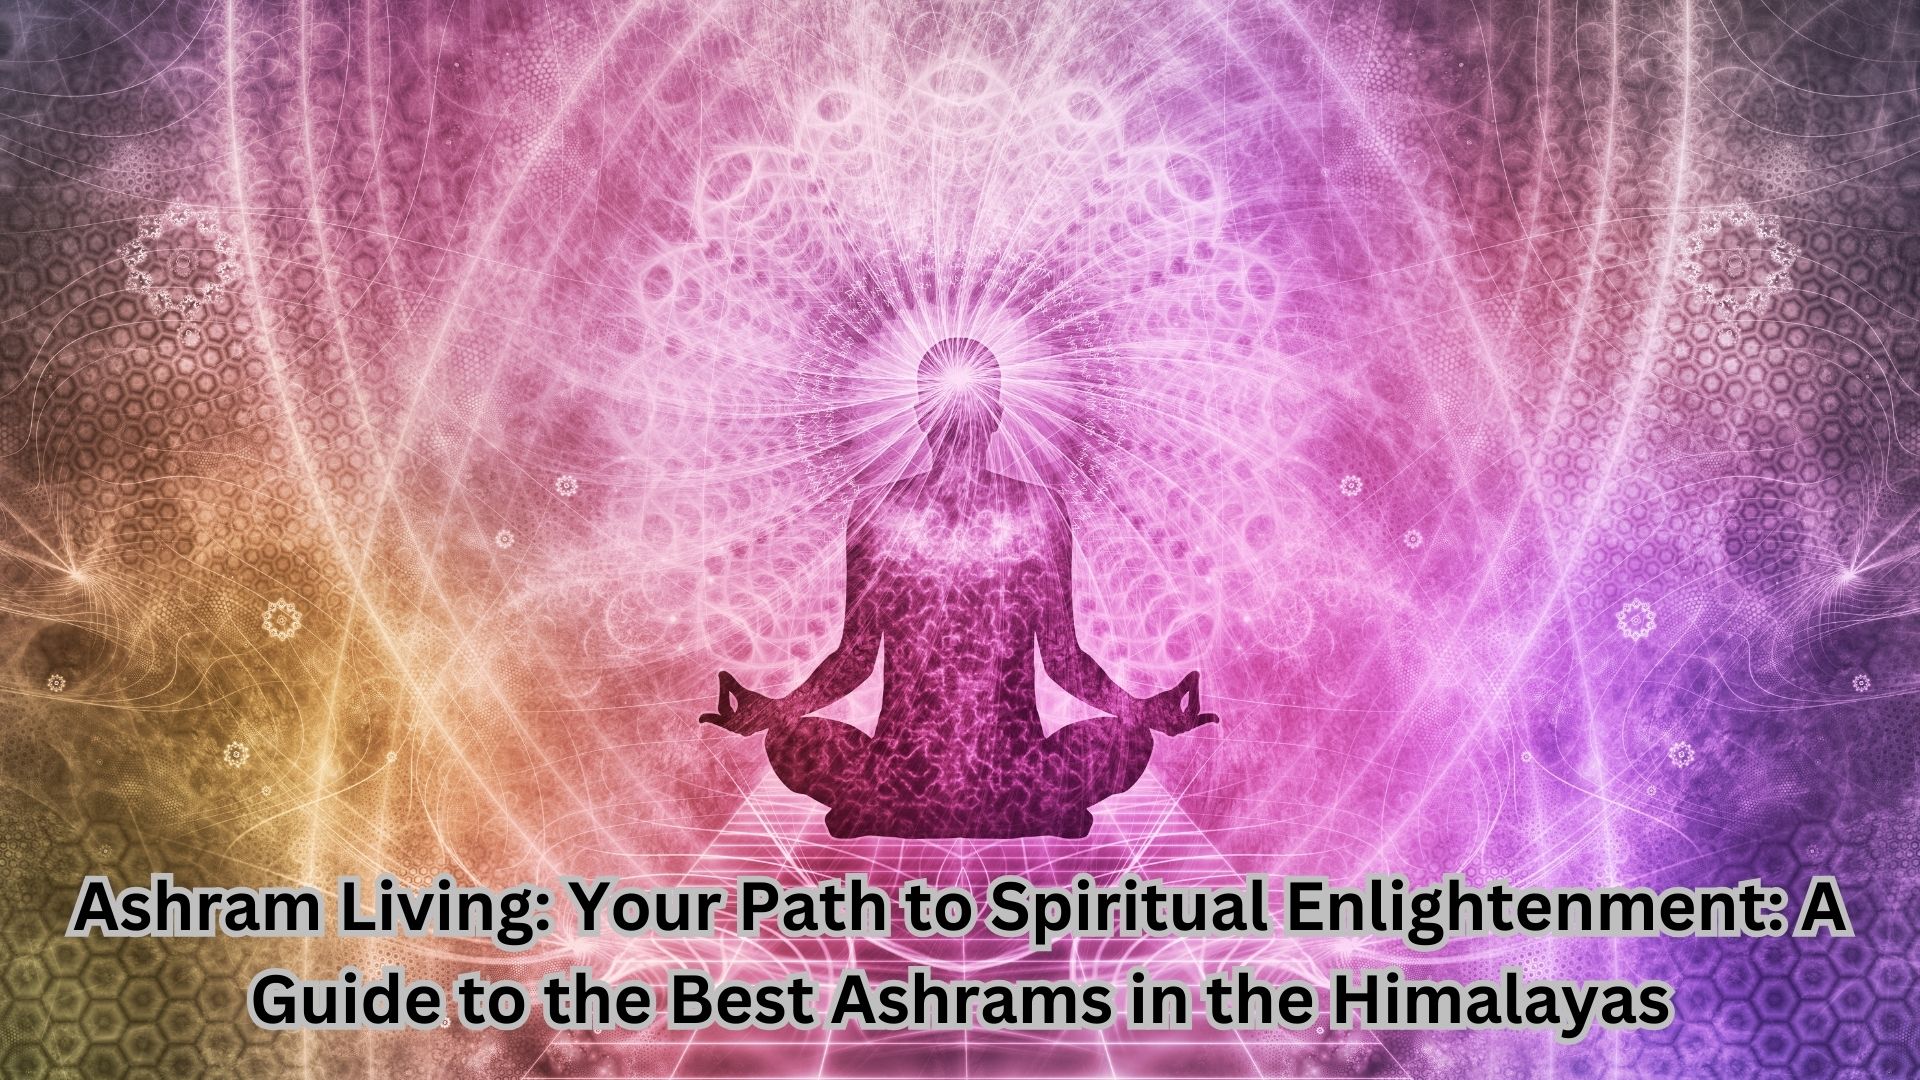 Ashram Living: Your Path to Spiritual Enlightenment: A Guide to the Best Ashrams in the Himalayas